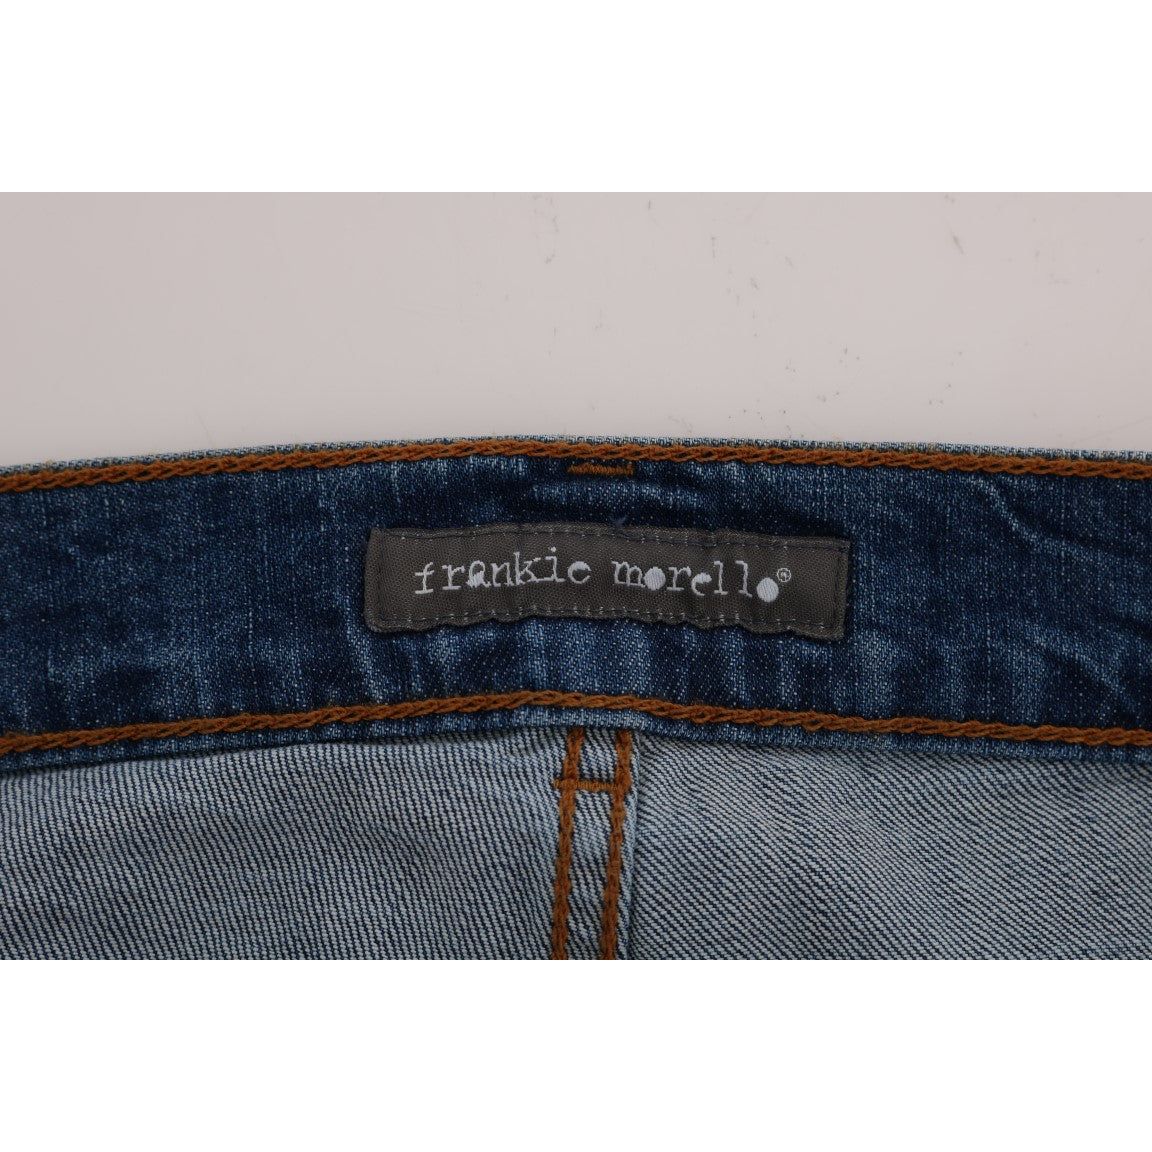 Frankie Morello Chic Slim Fit Blue Distressed Jeans blue-wash-torn-dundee-slim-fit-jeans